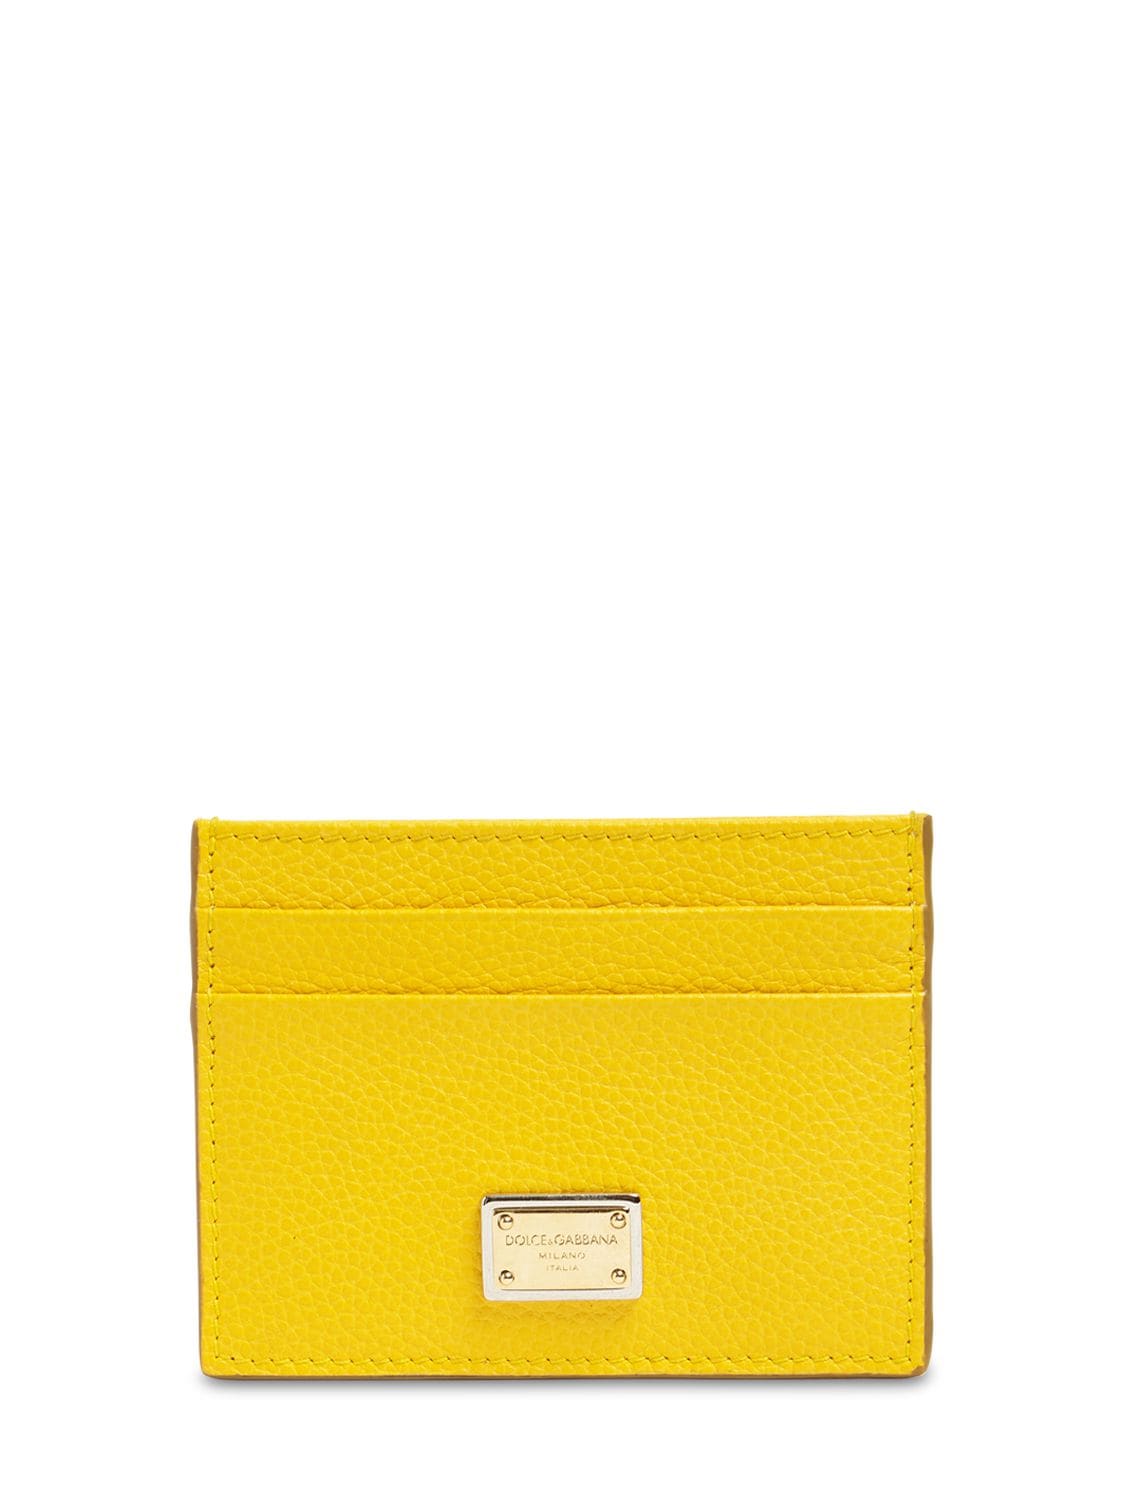 Dolce & Gabbana Grained Leather Card Holder In Yellow